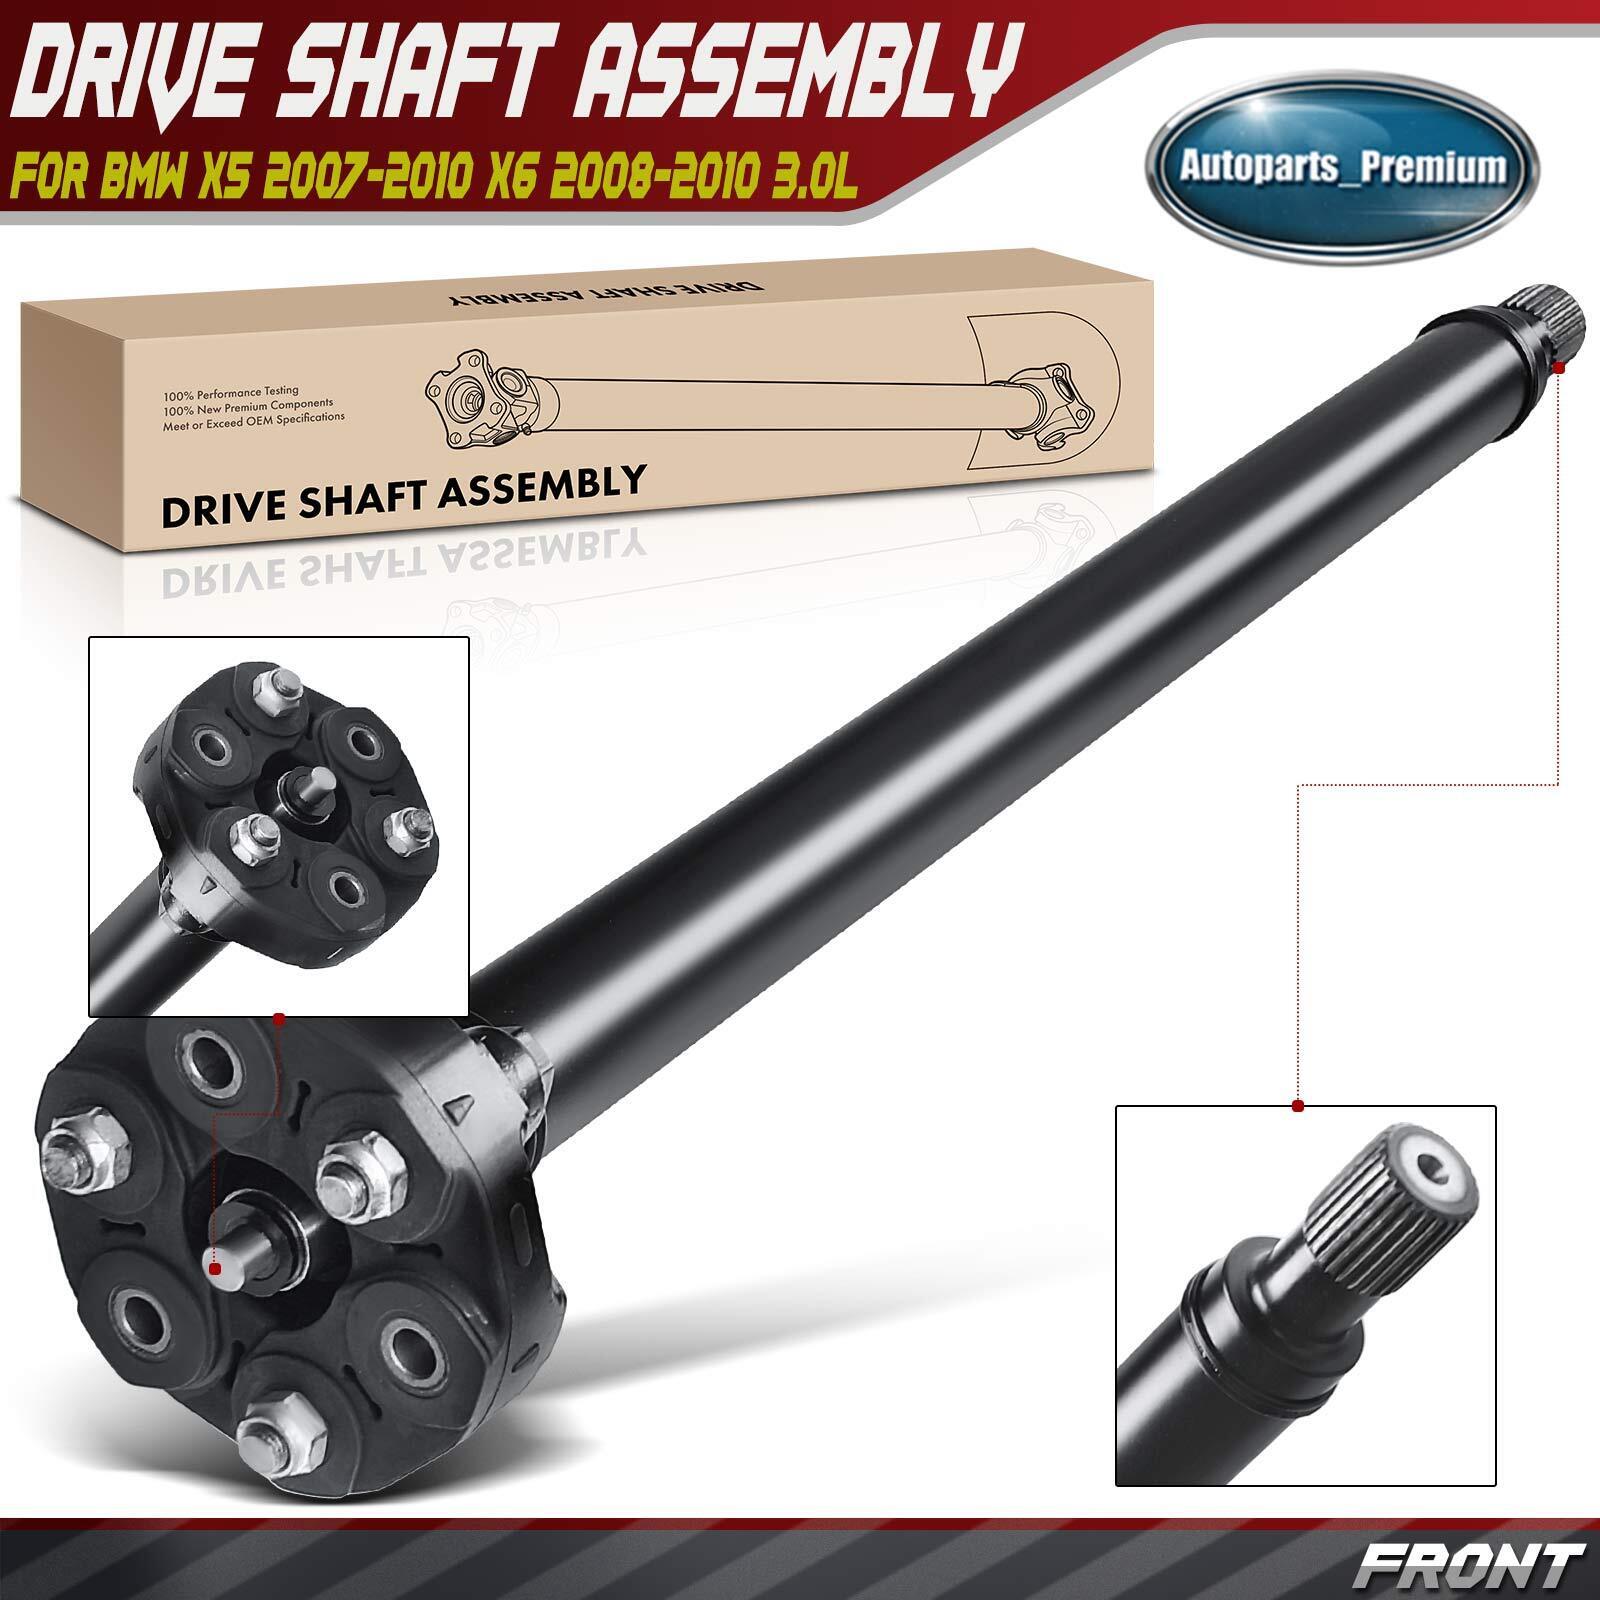 Front Drive Shaft Assembly for BMW X6 E71 2008-2010 X5 E70 2007-2010 L6 3.0L